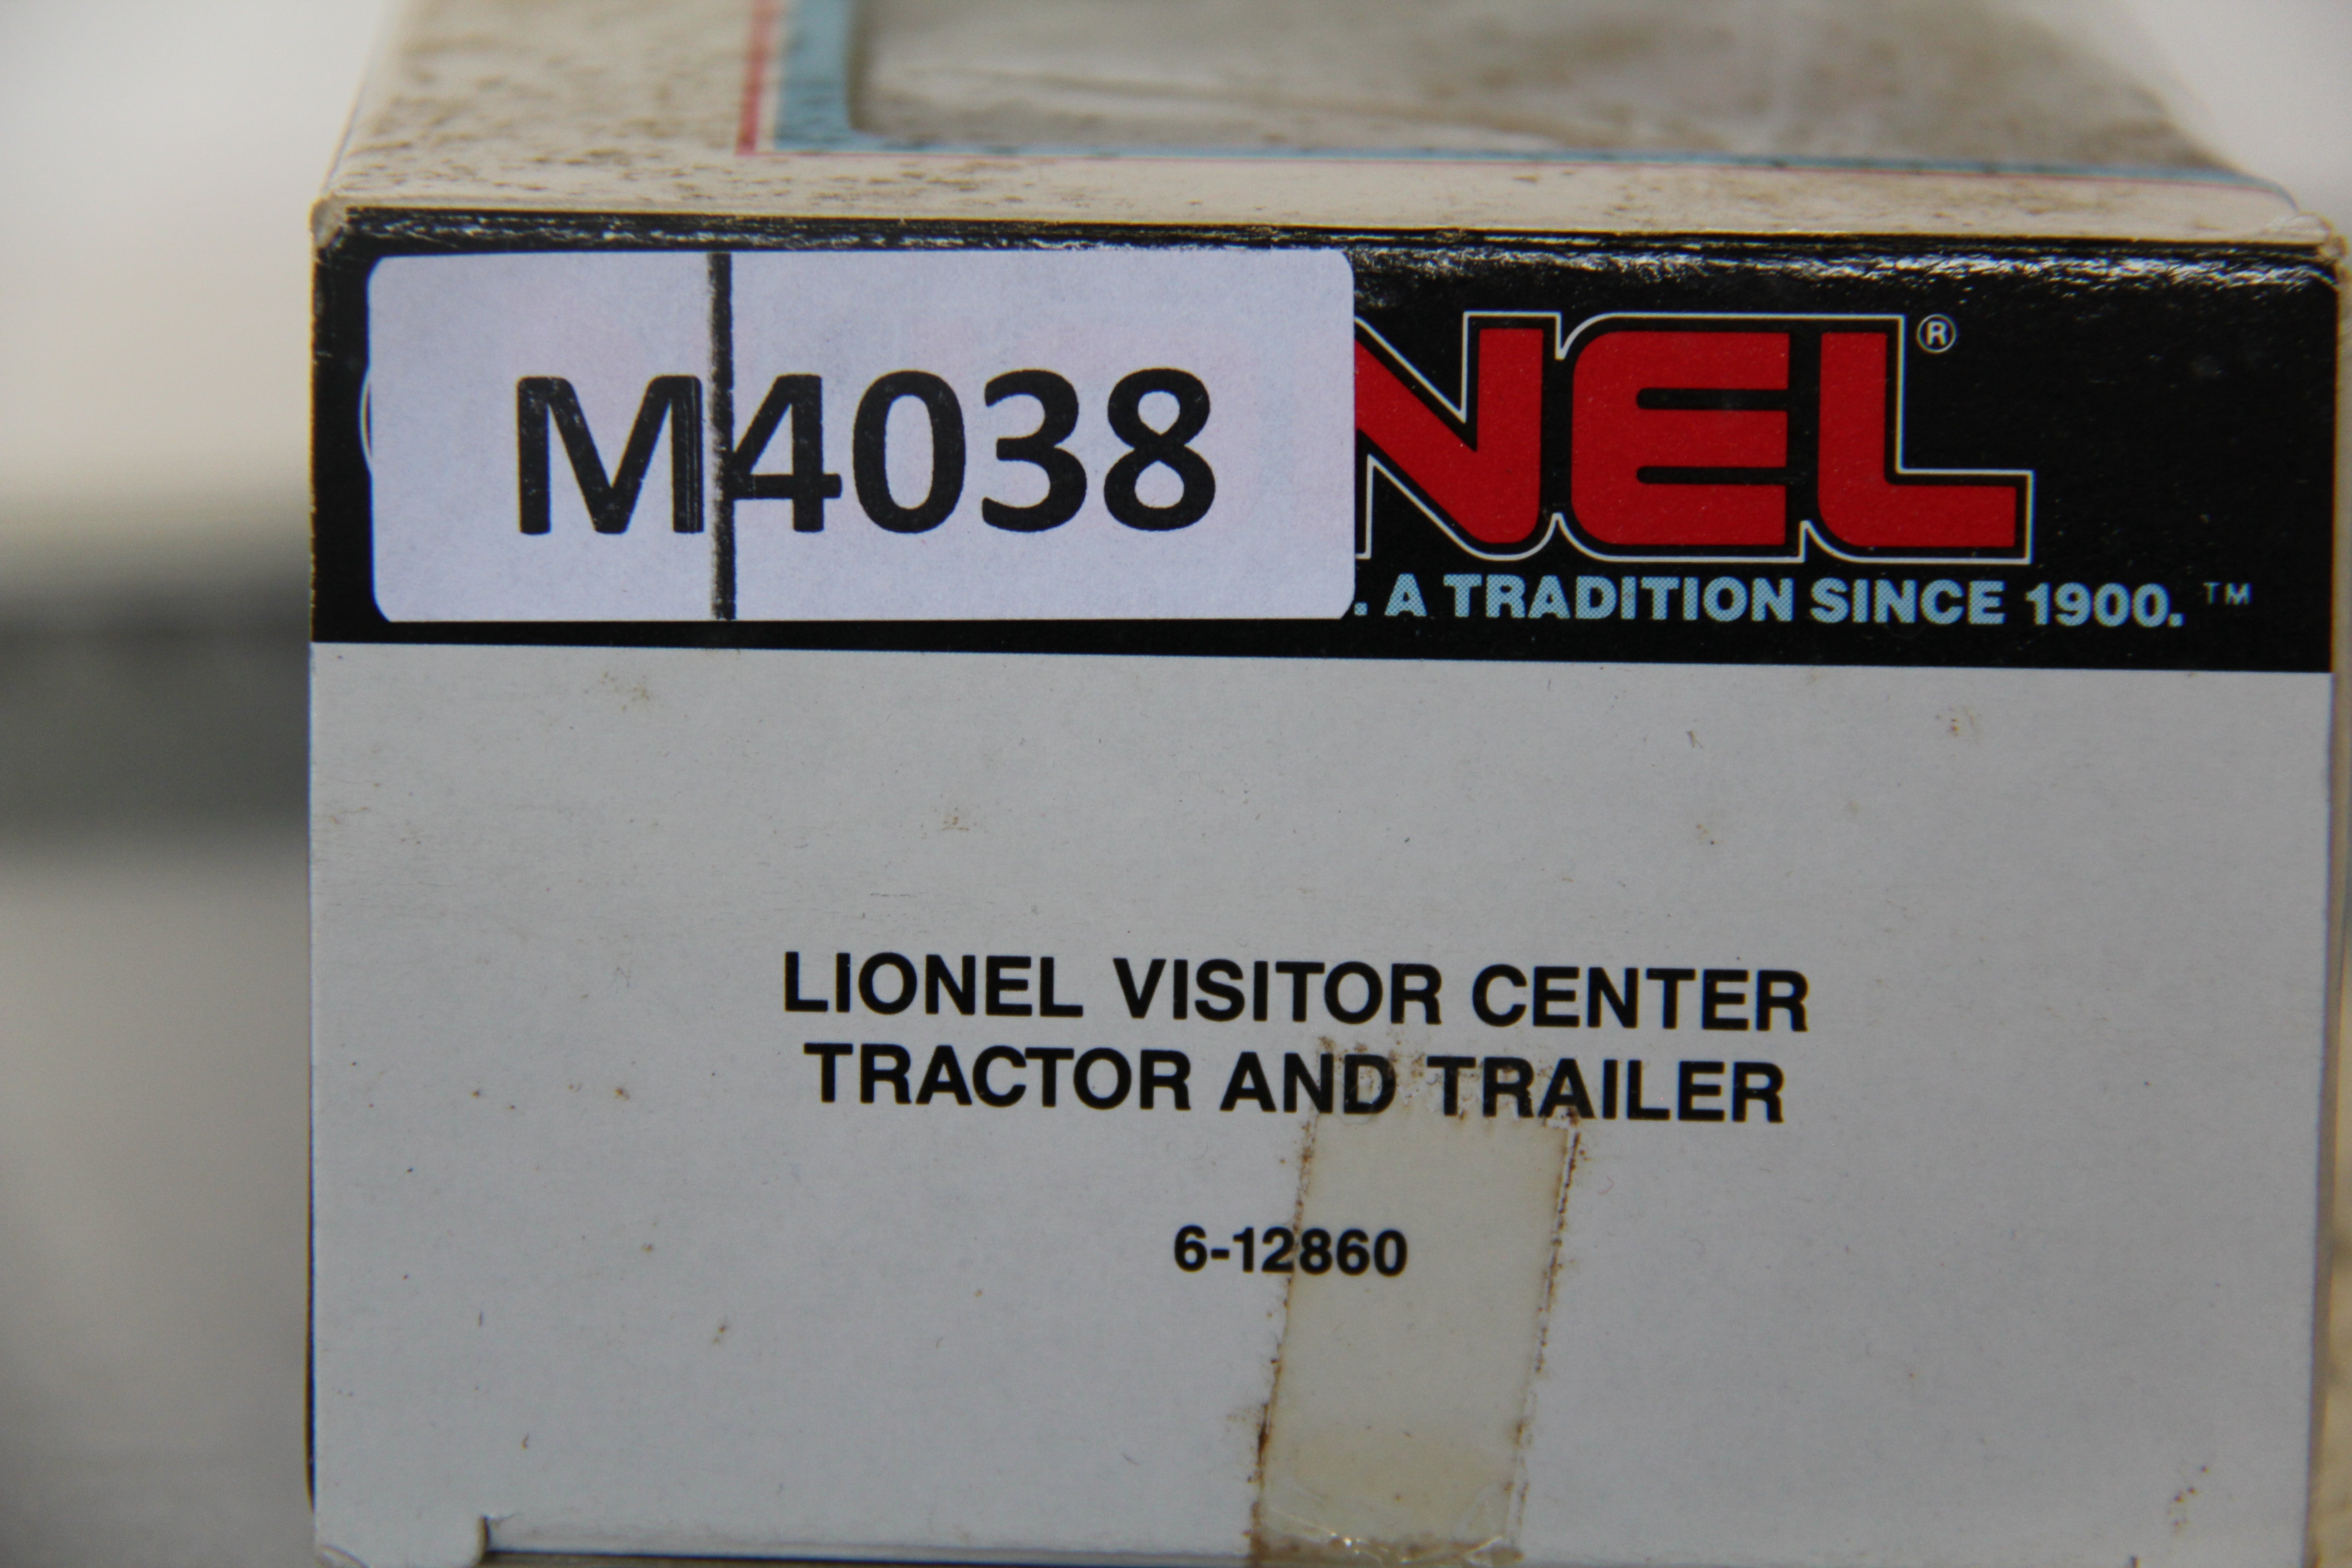 Lionel 6-12860 Lionel Visitor Center Tractor and Trailer-Second hand-M4038